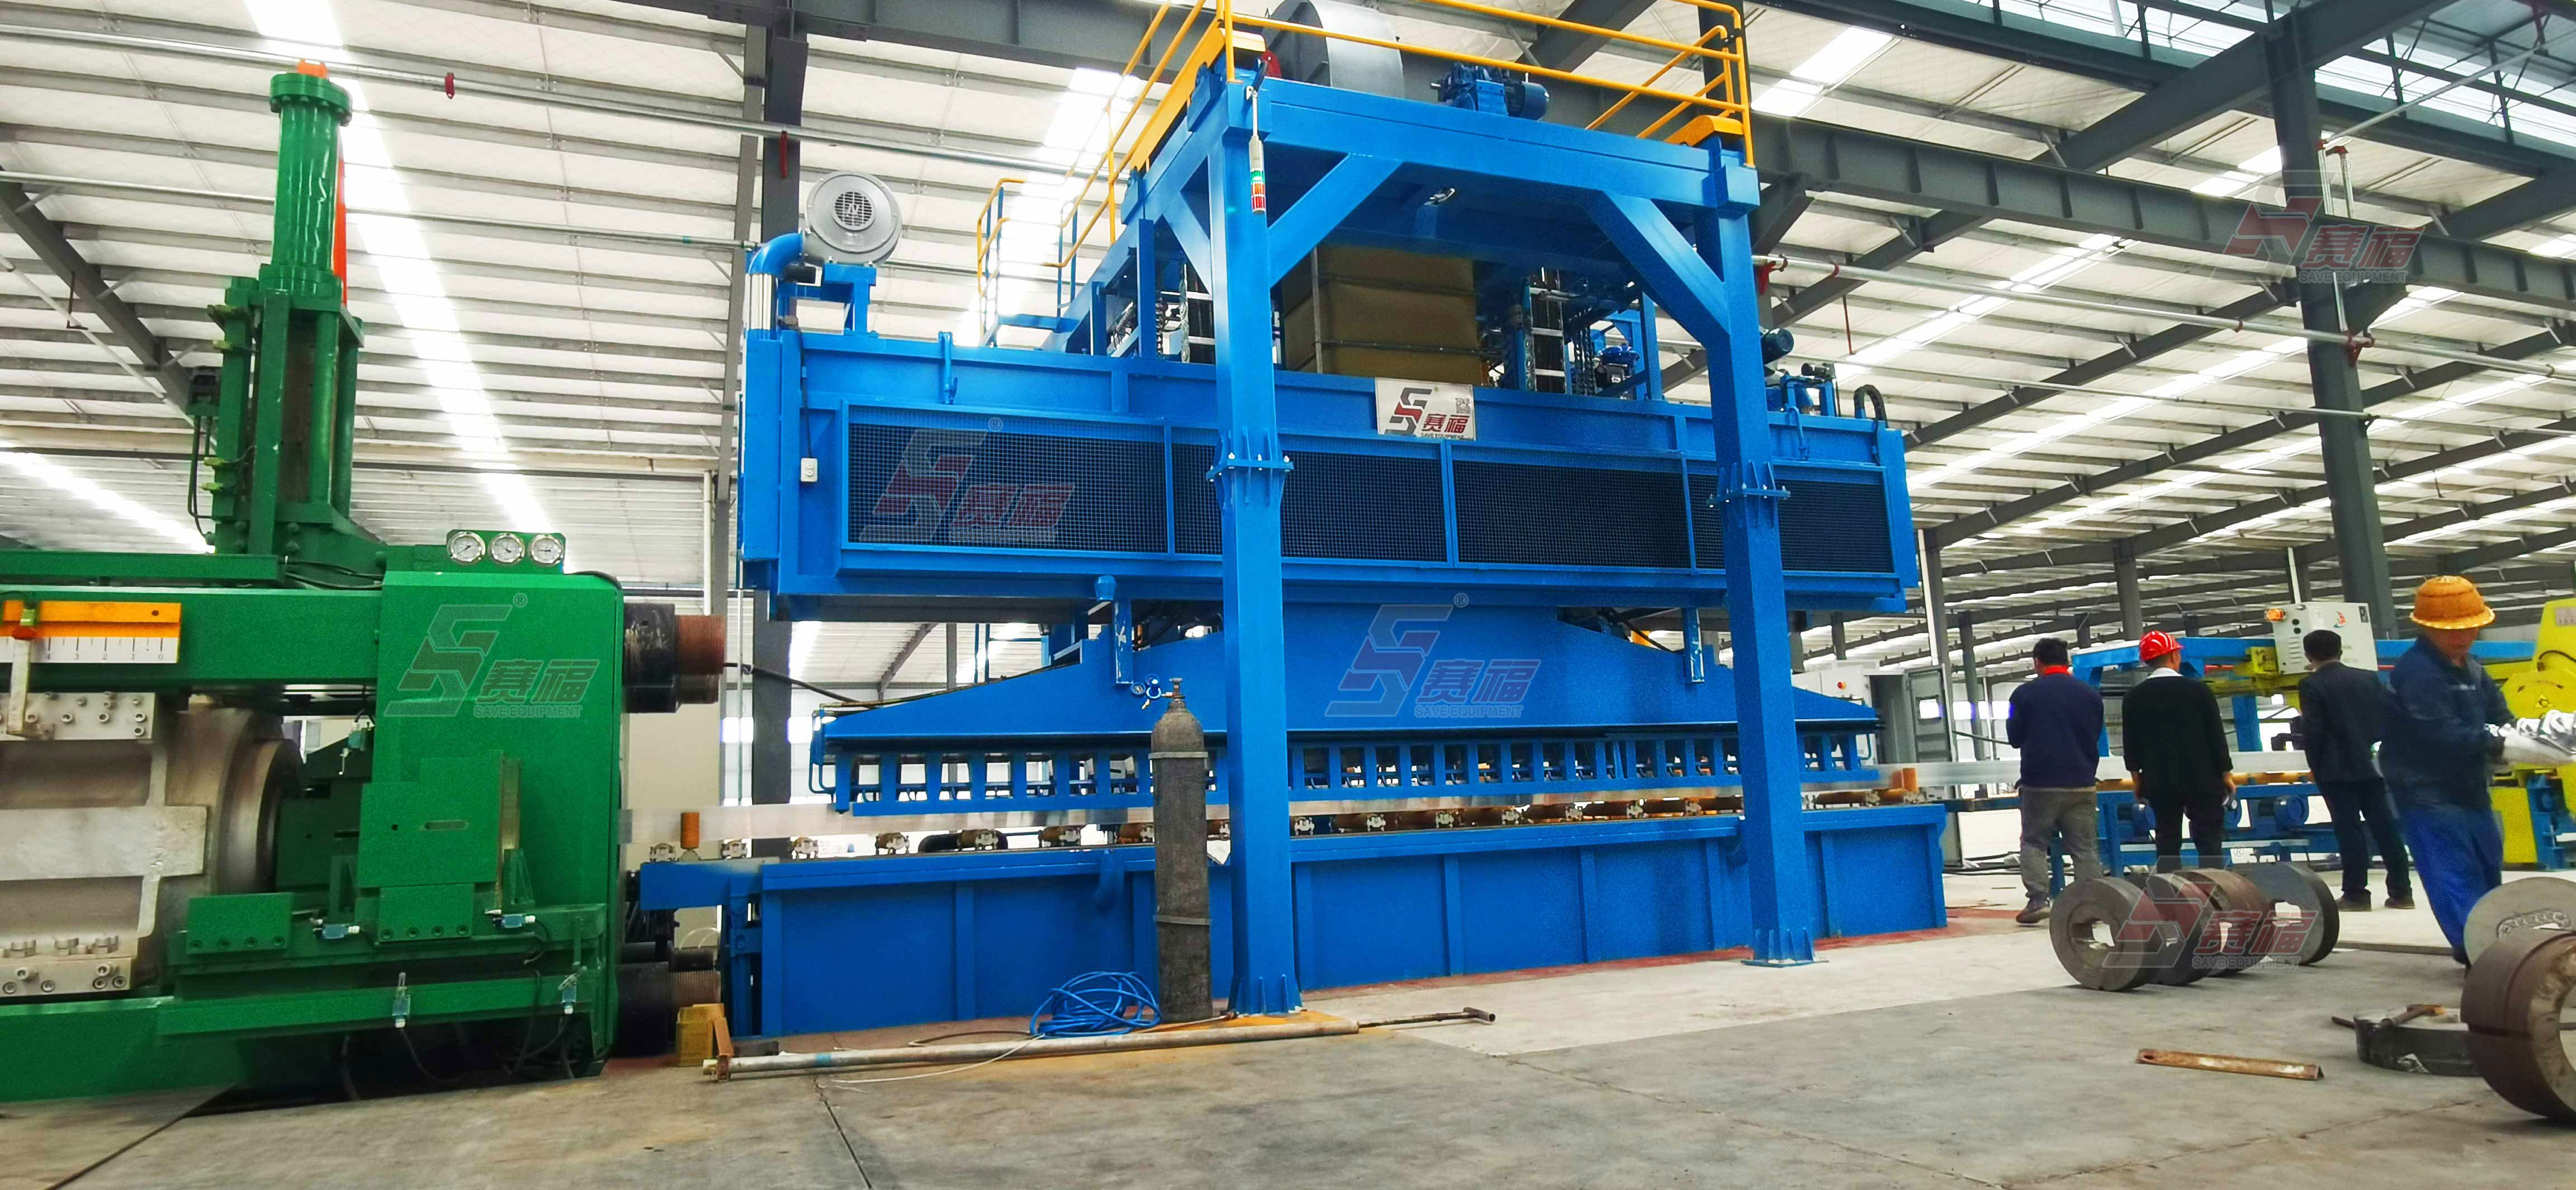 Press Metal International (Malaysia) for quenching equipment of 3000T extrusion plant, which has been put into productio